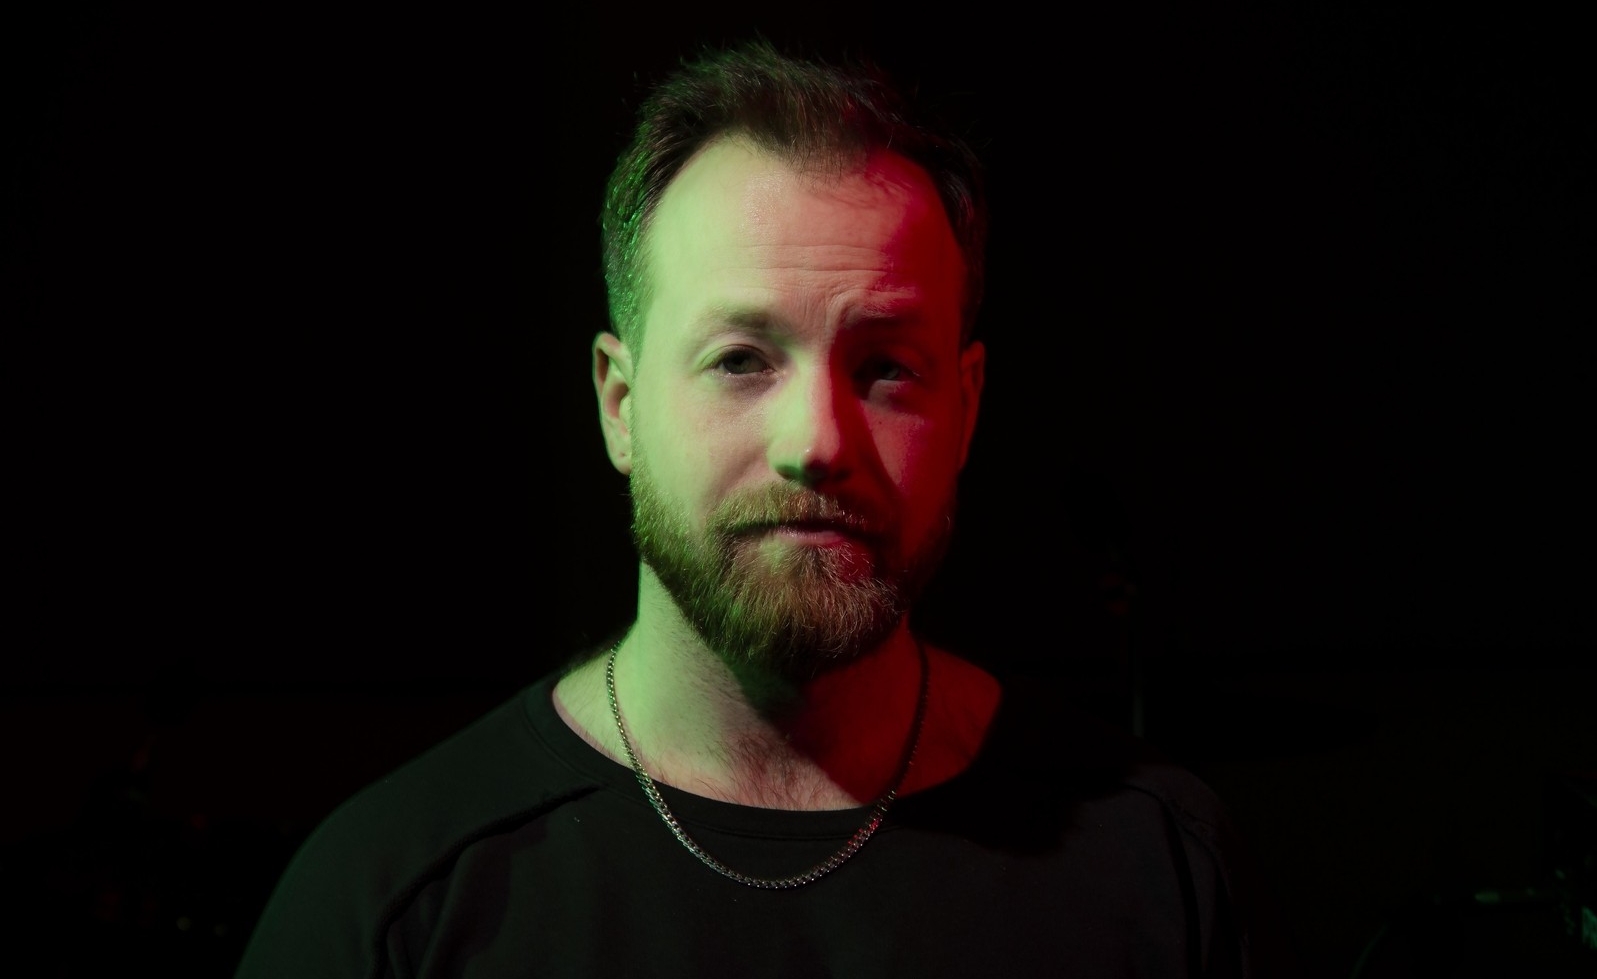 Headshot of a man with short light brown hair and a beard, wearing a black shirt, stands in front of a black backdrop